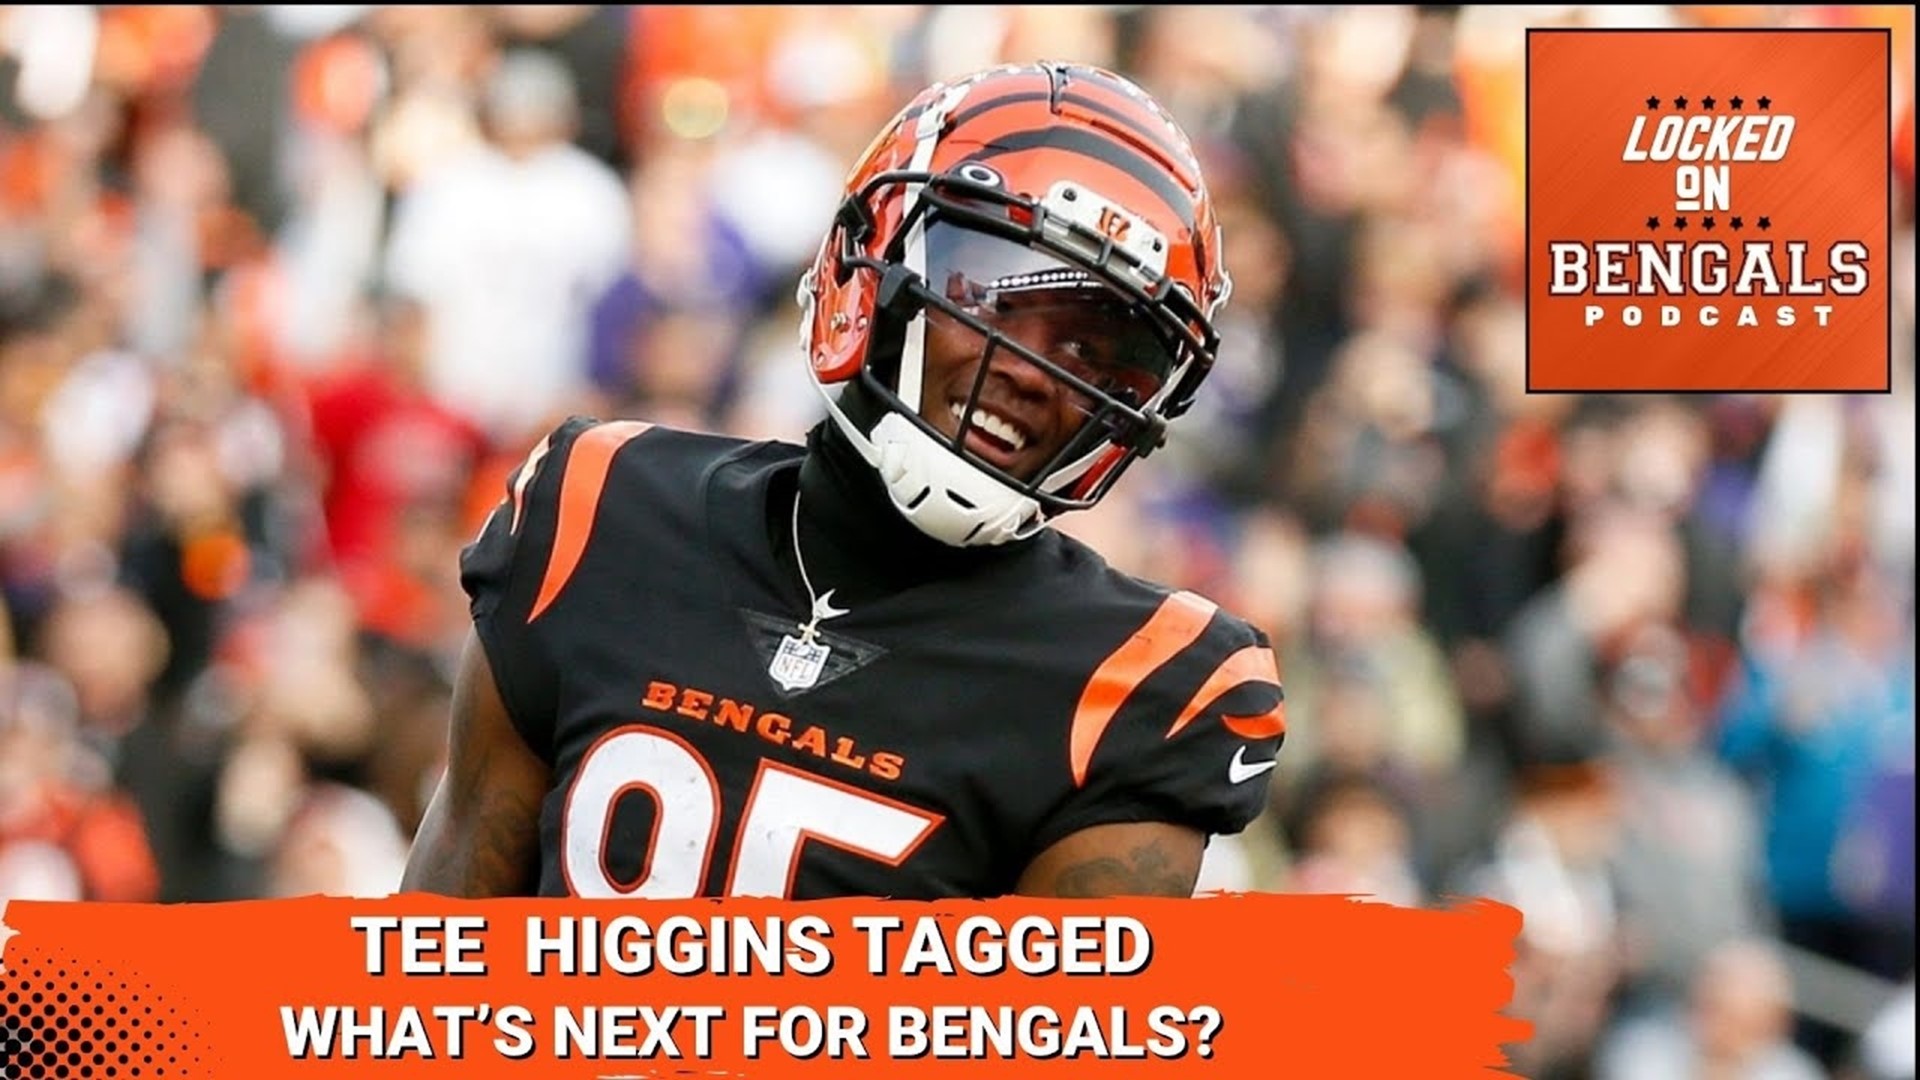 The Cincinnati Bengals are placing the franchise tag on wide receiver Tee Higgins according to Ian Rapoport of NFL Network.